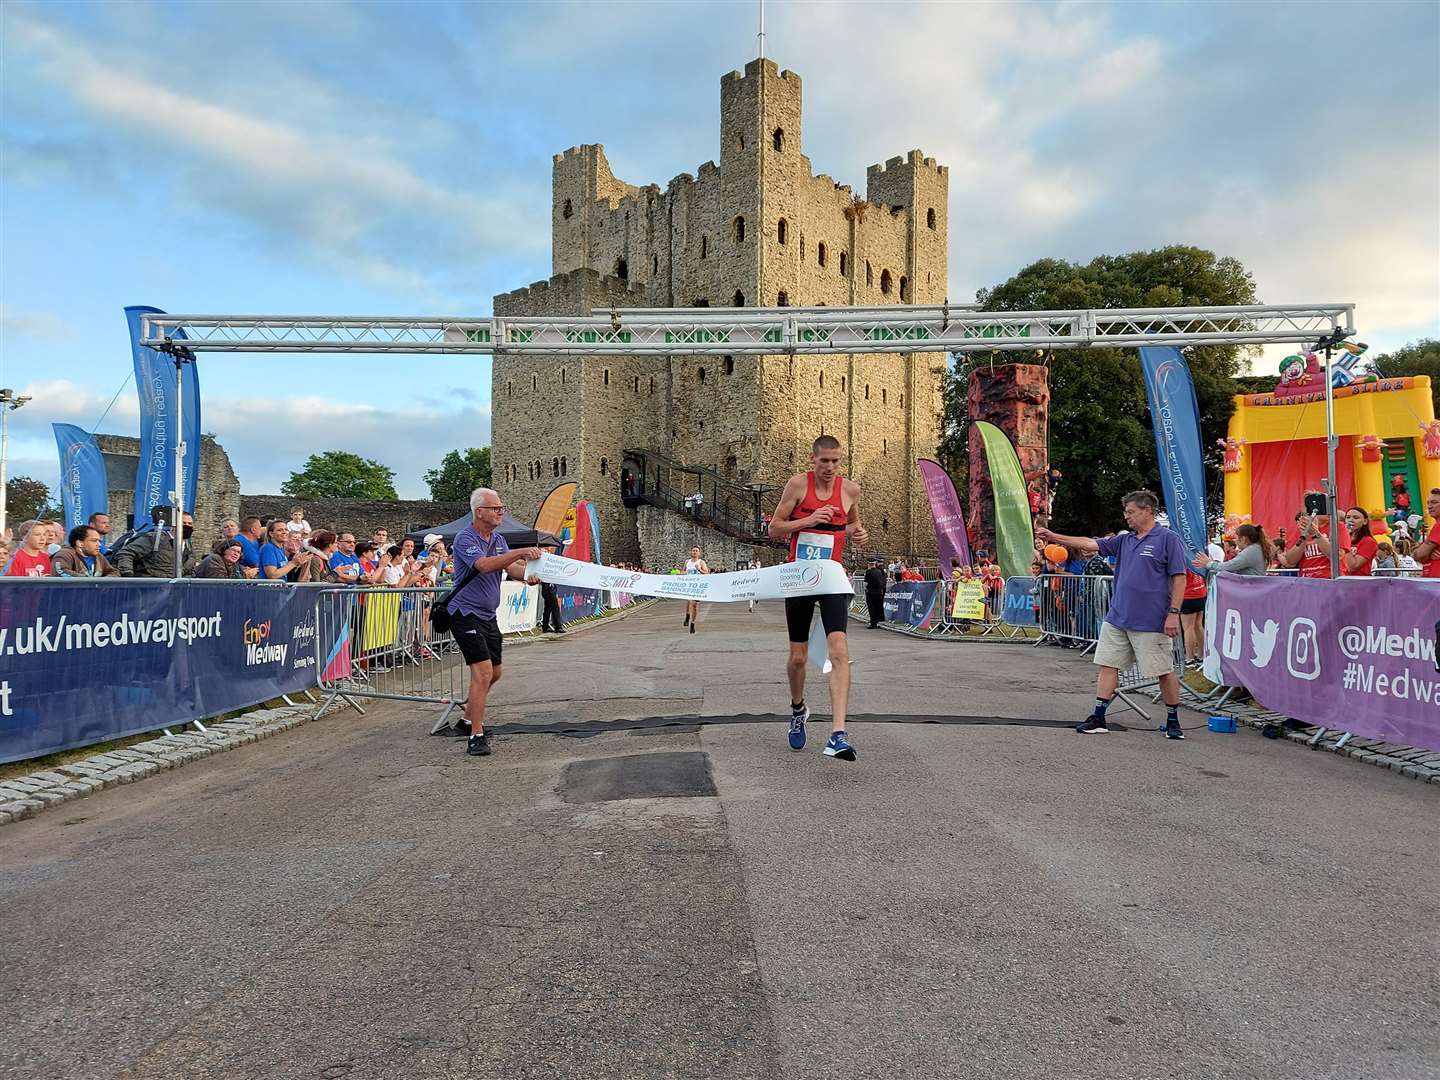 Medway Mile usually starts and finishes at Rochester Castle